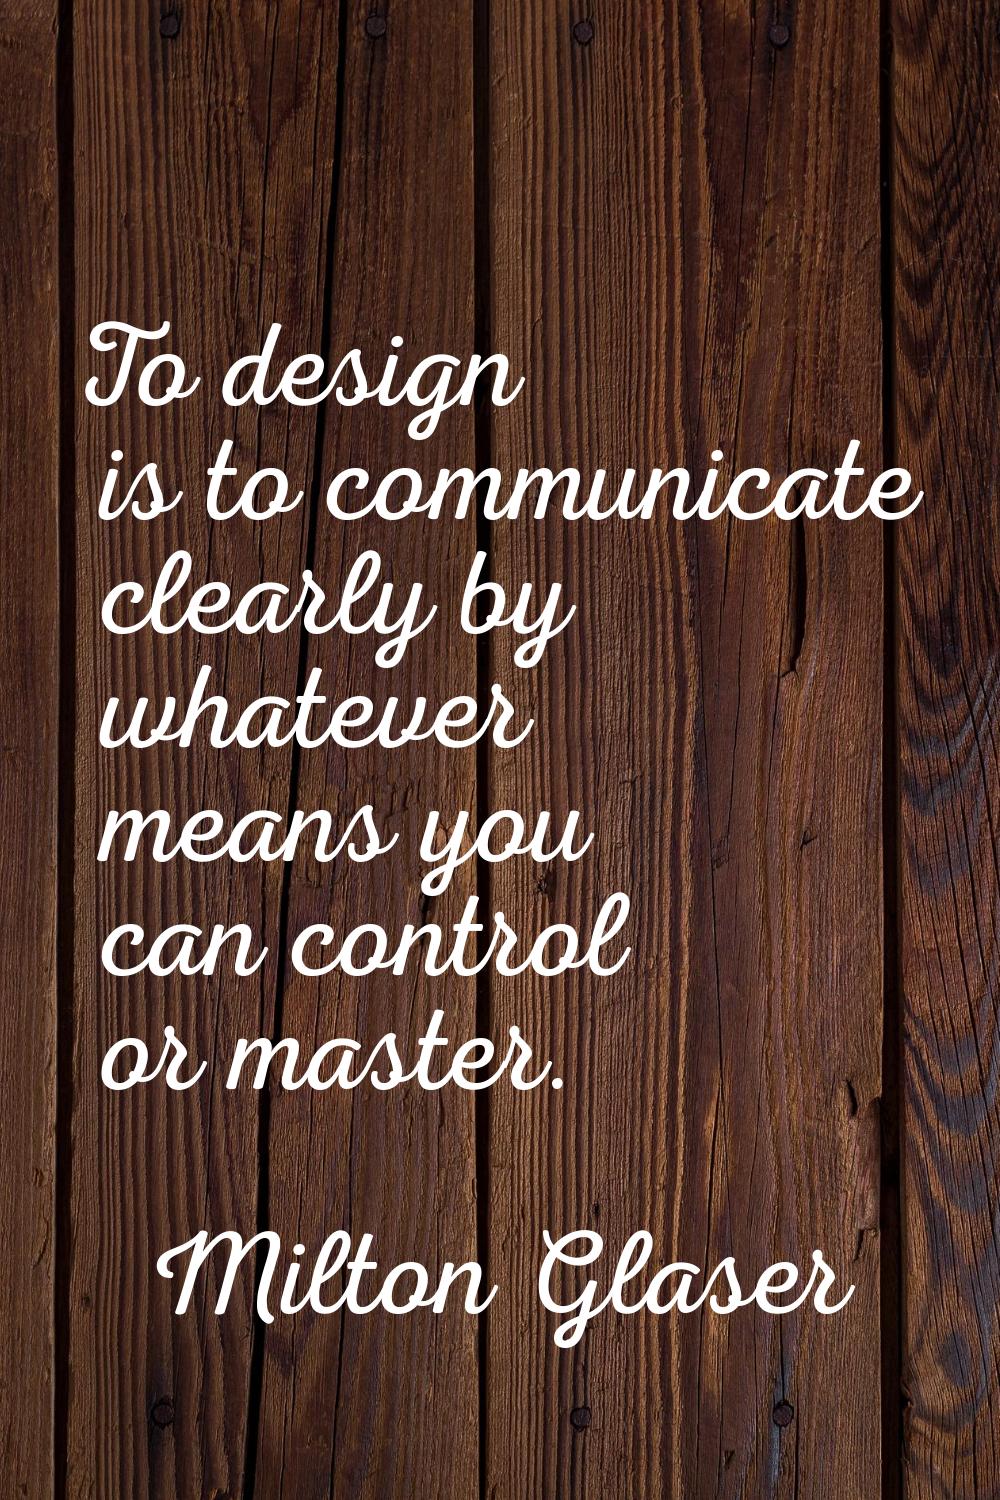 To design is to communicate clearly by whatever means you can control or master.